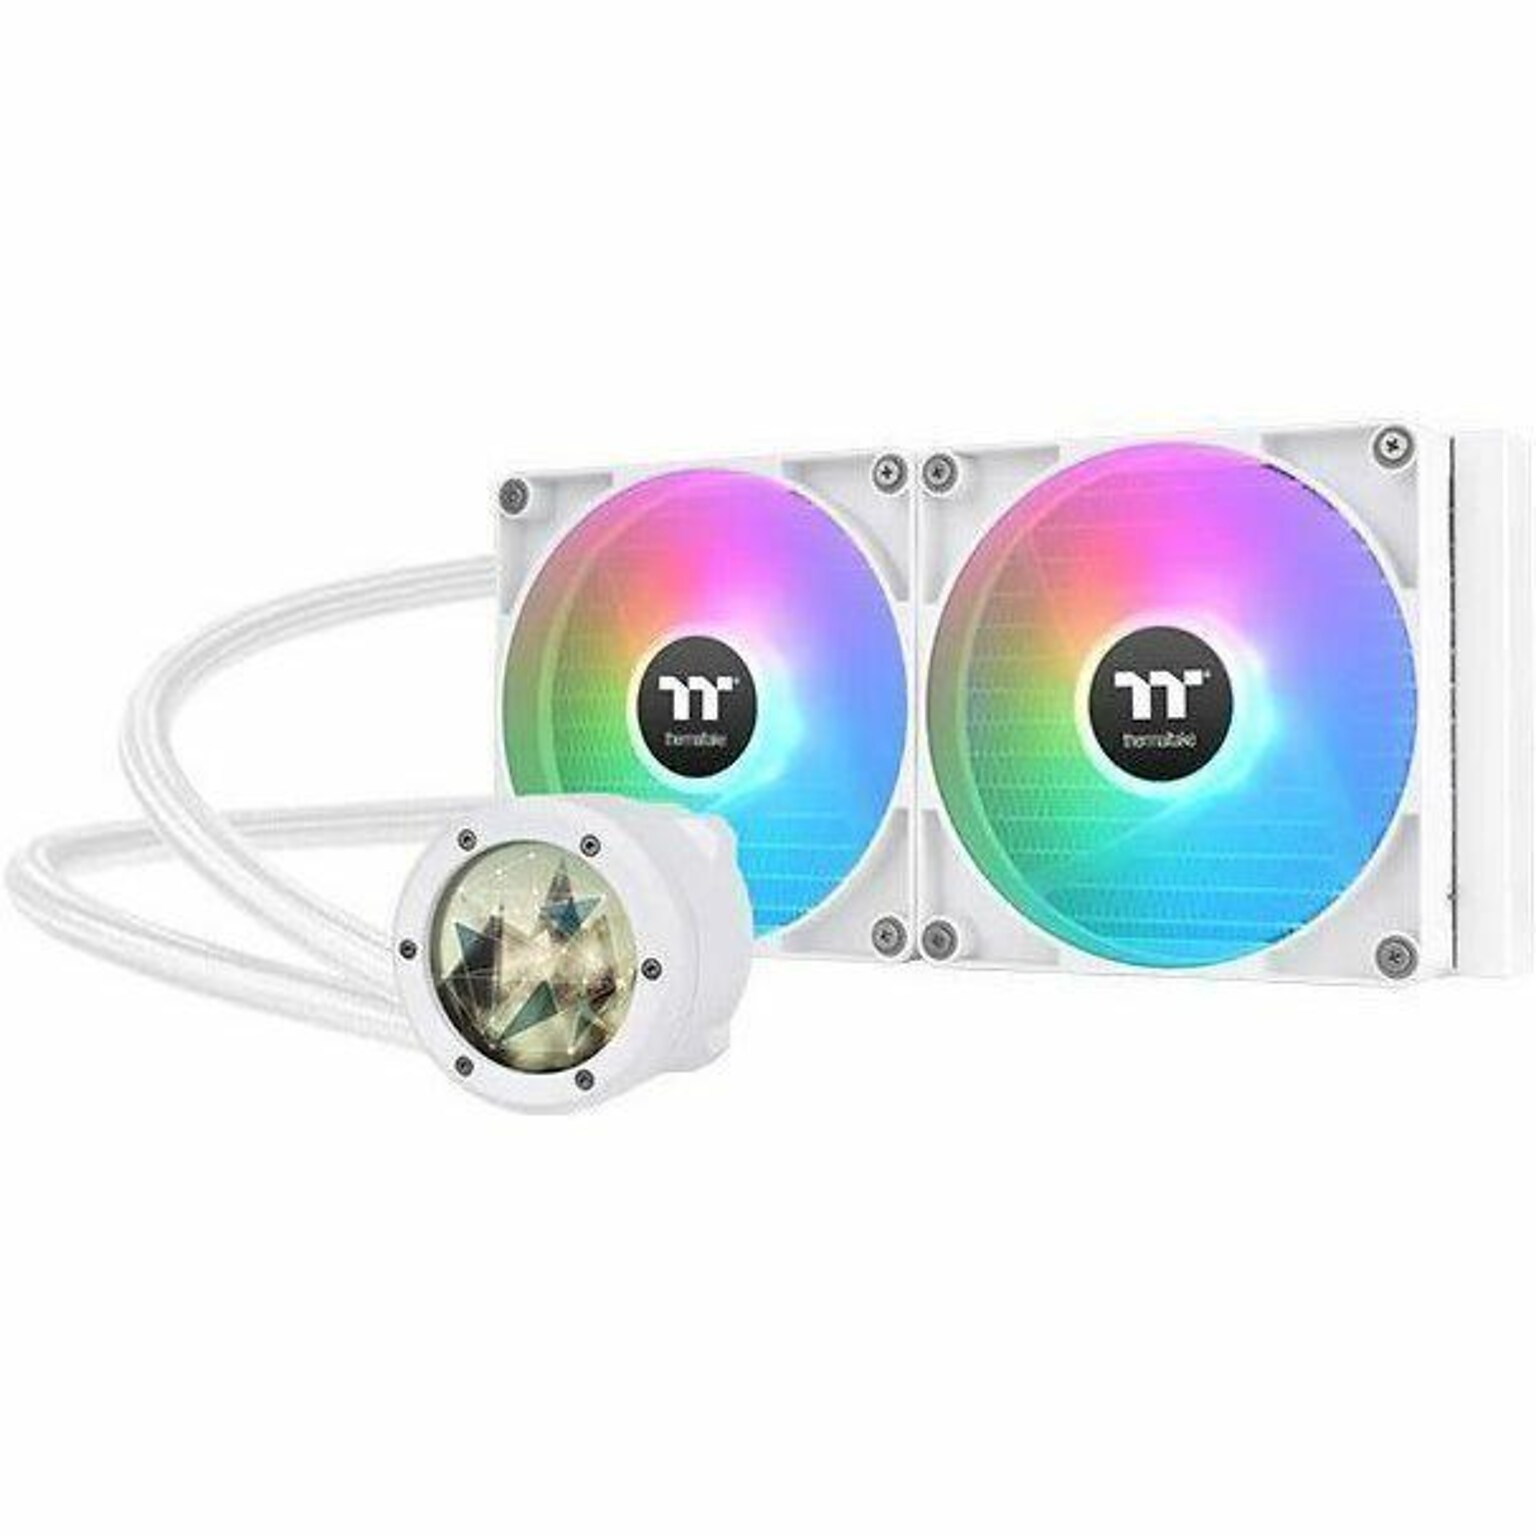 Thermaltake TH280 V2 Ultra ARGB Sync 140mm Cooling Fan/Radiator/Water Block/Pump with RGB Lighting (CLW406PL14SWA)